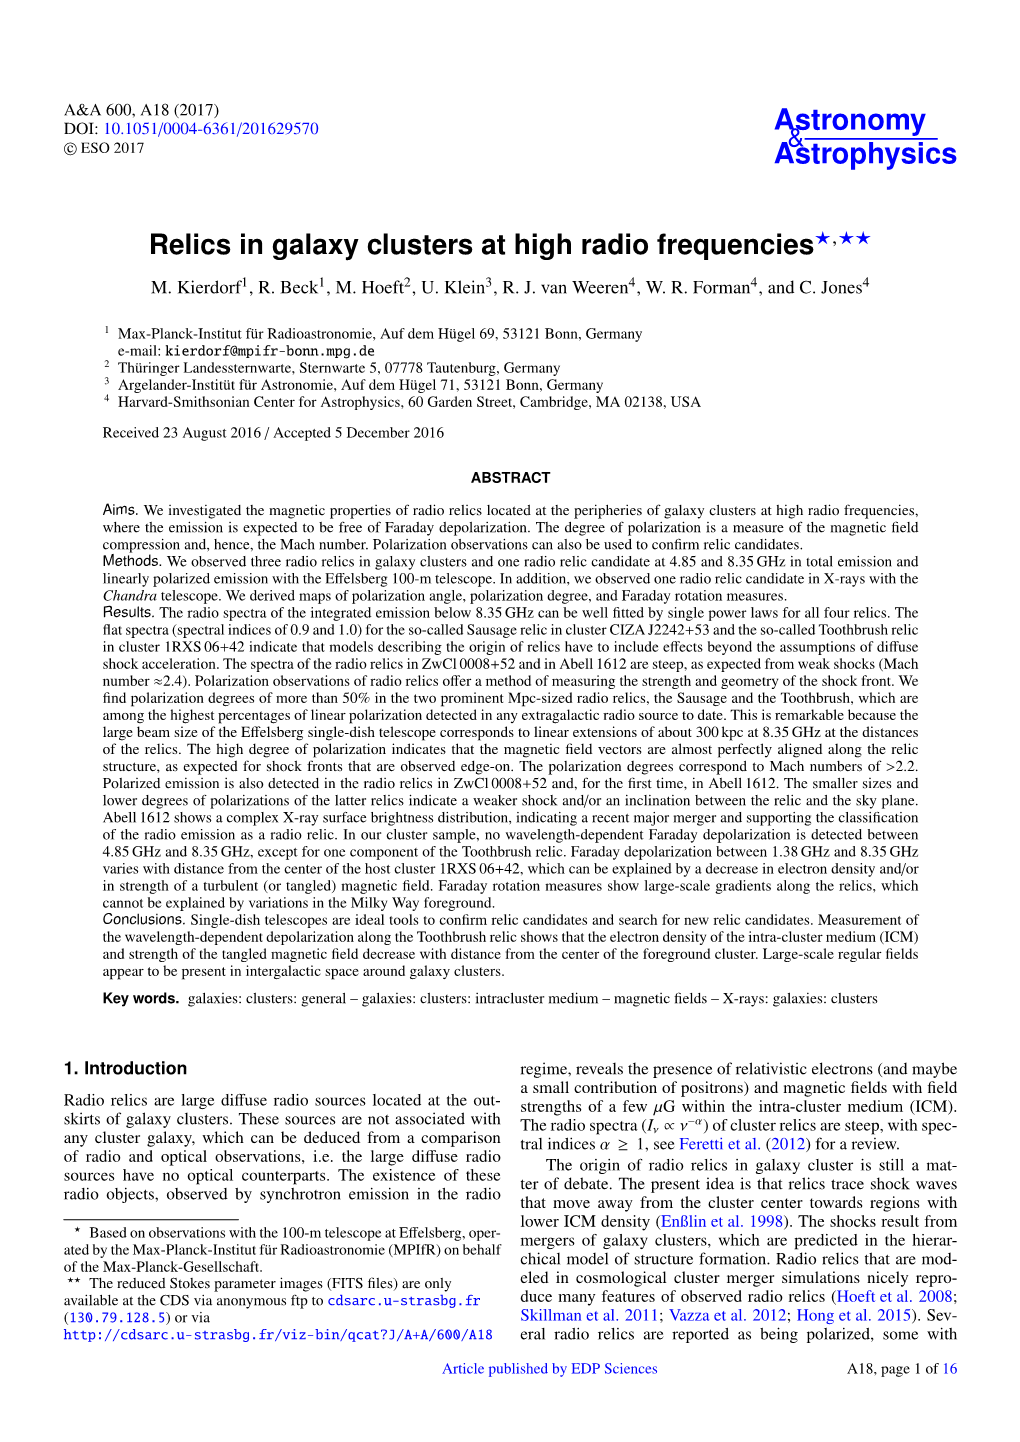 Relics in Galaxy Clusters at High Radio Frequencies?,?? M